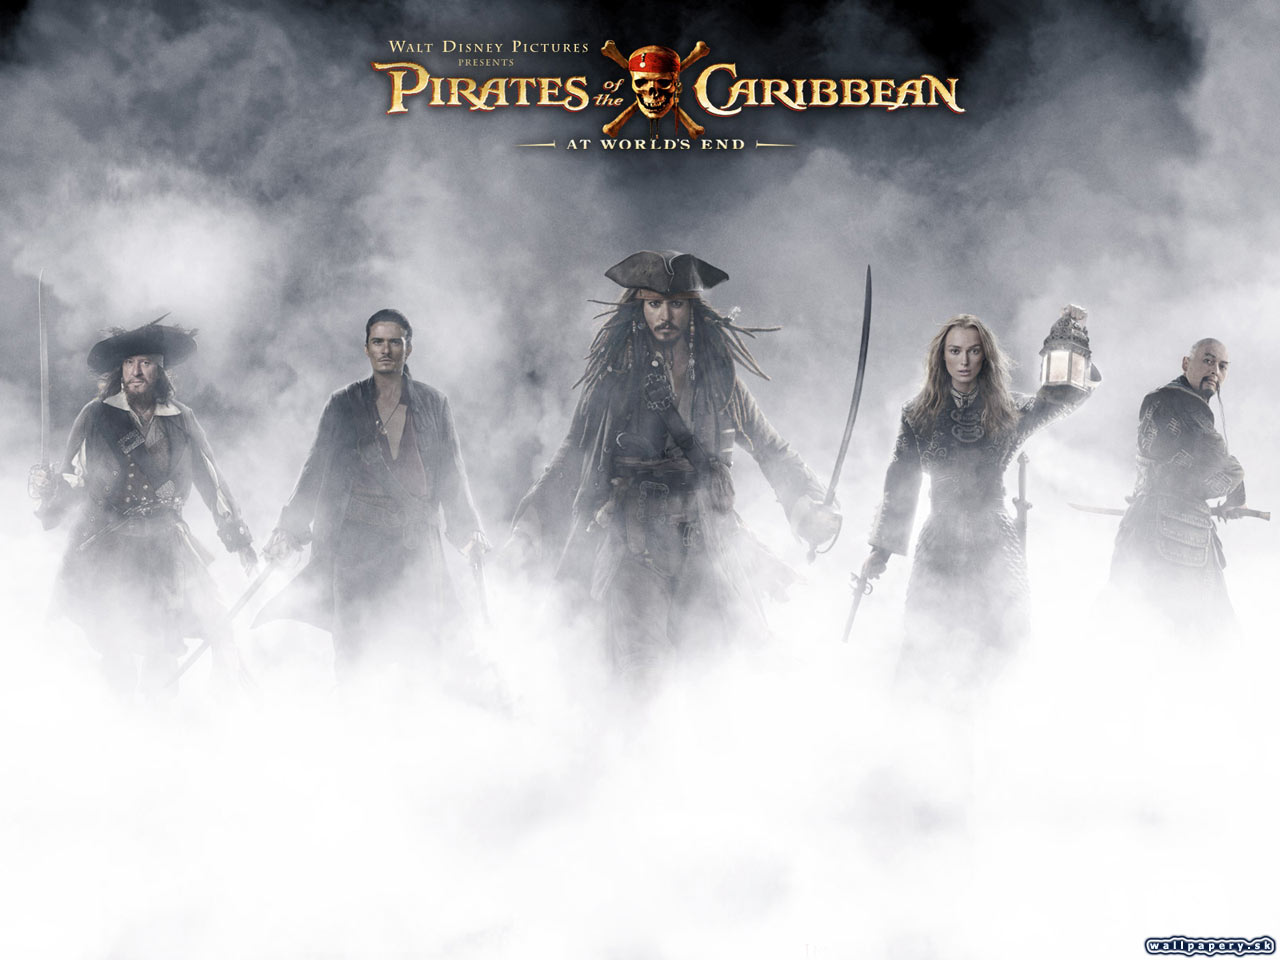 Pirates of the Caribbean: At World's End - wallpaper 6